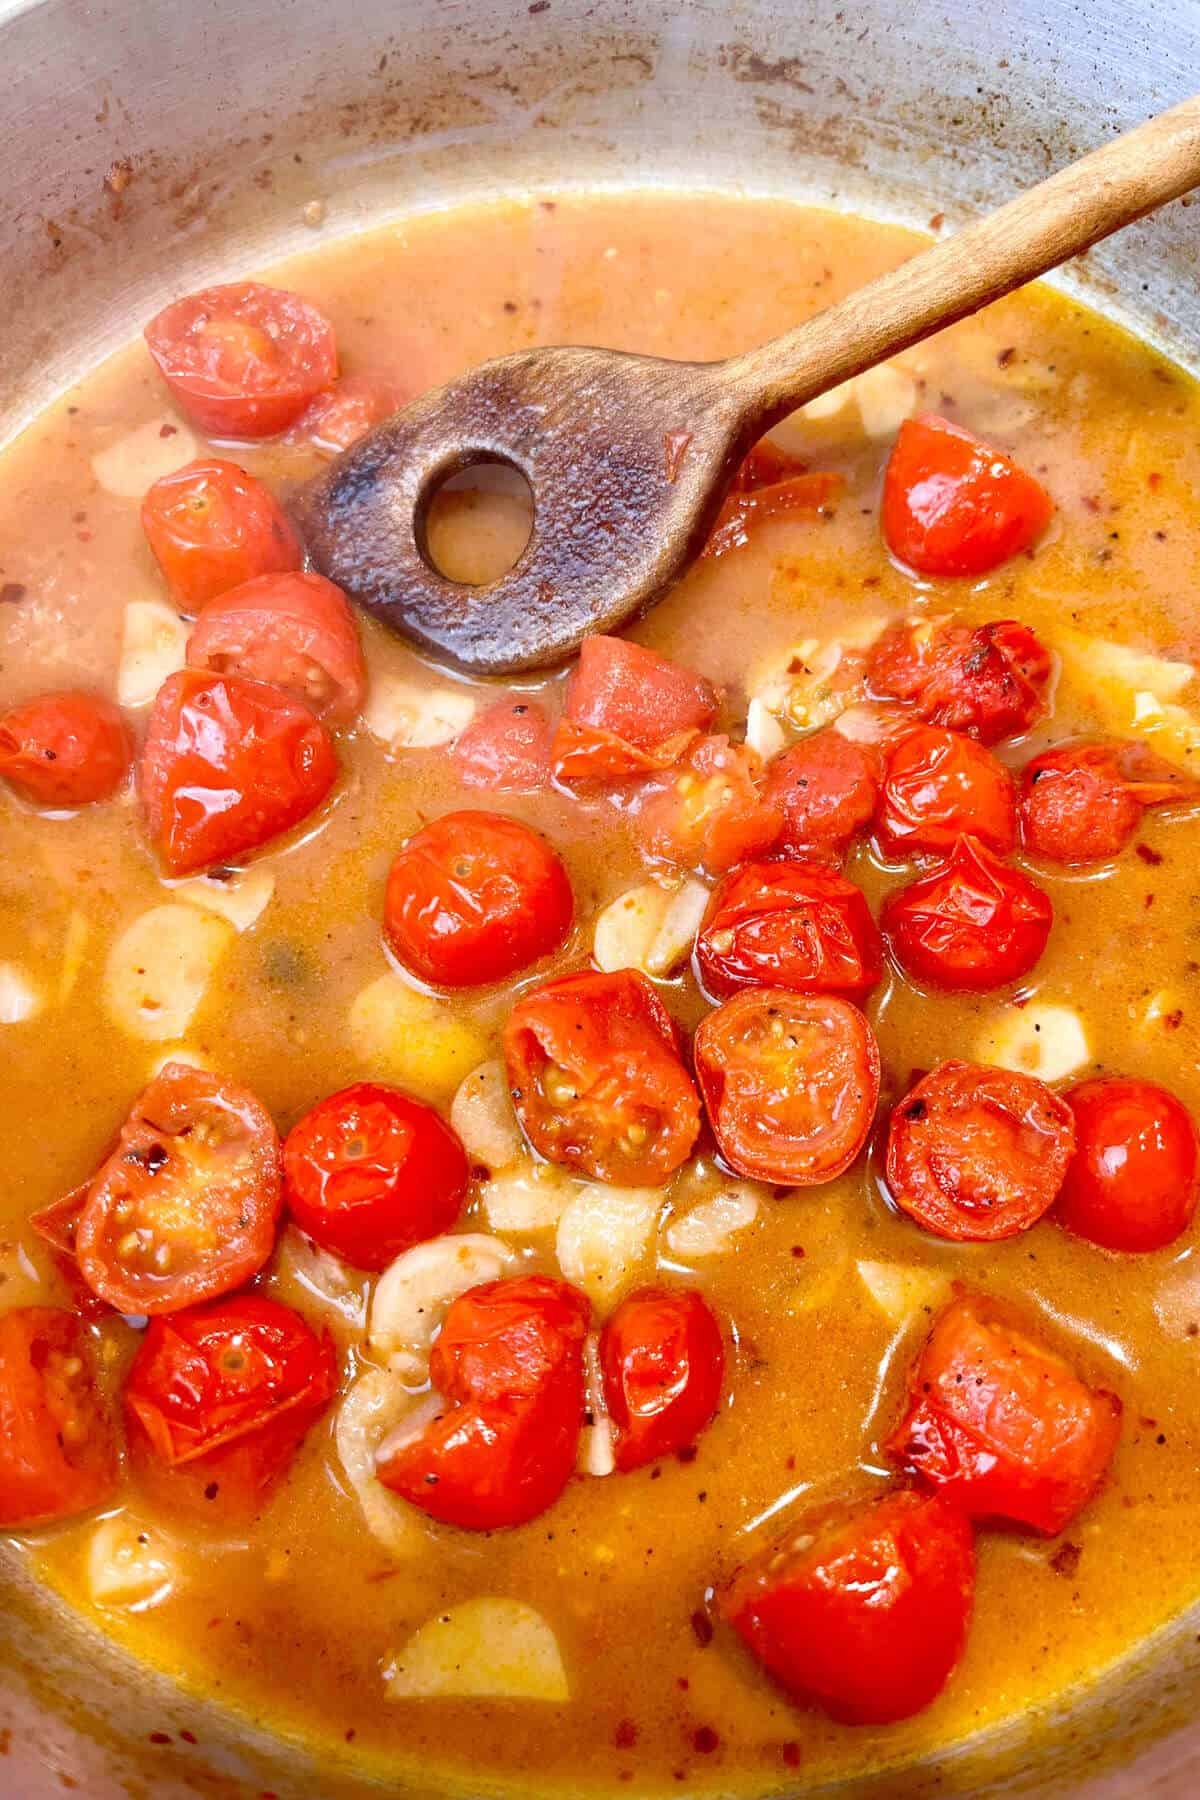 Tomatoes and clam juice cooking in pan.